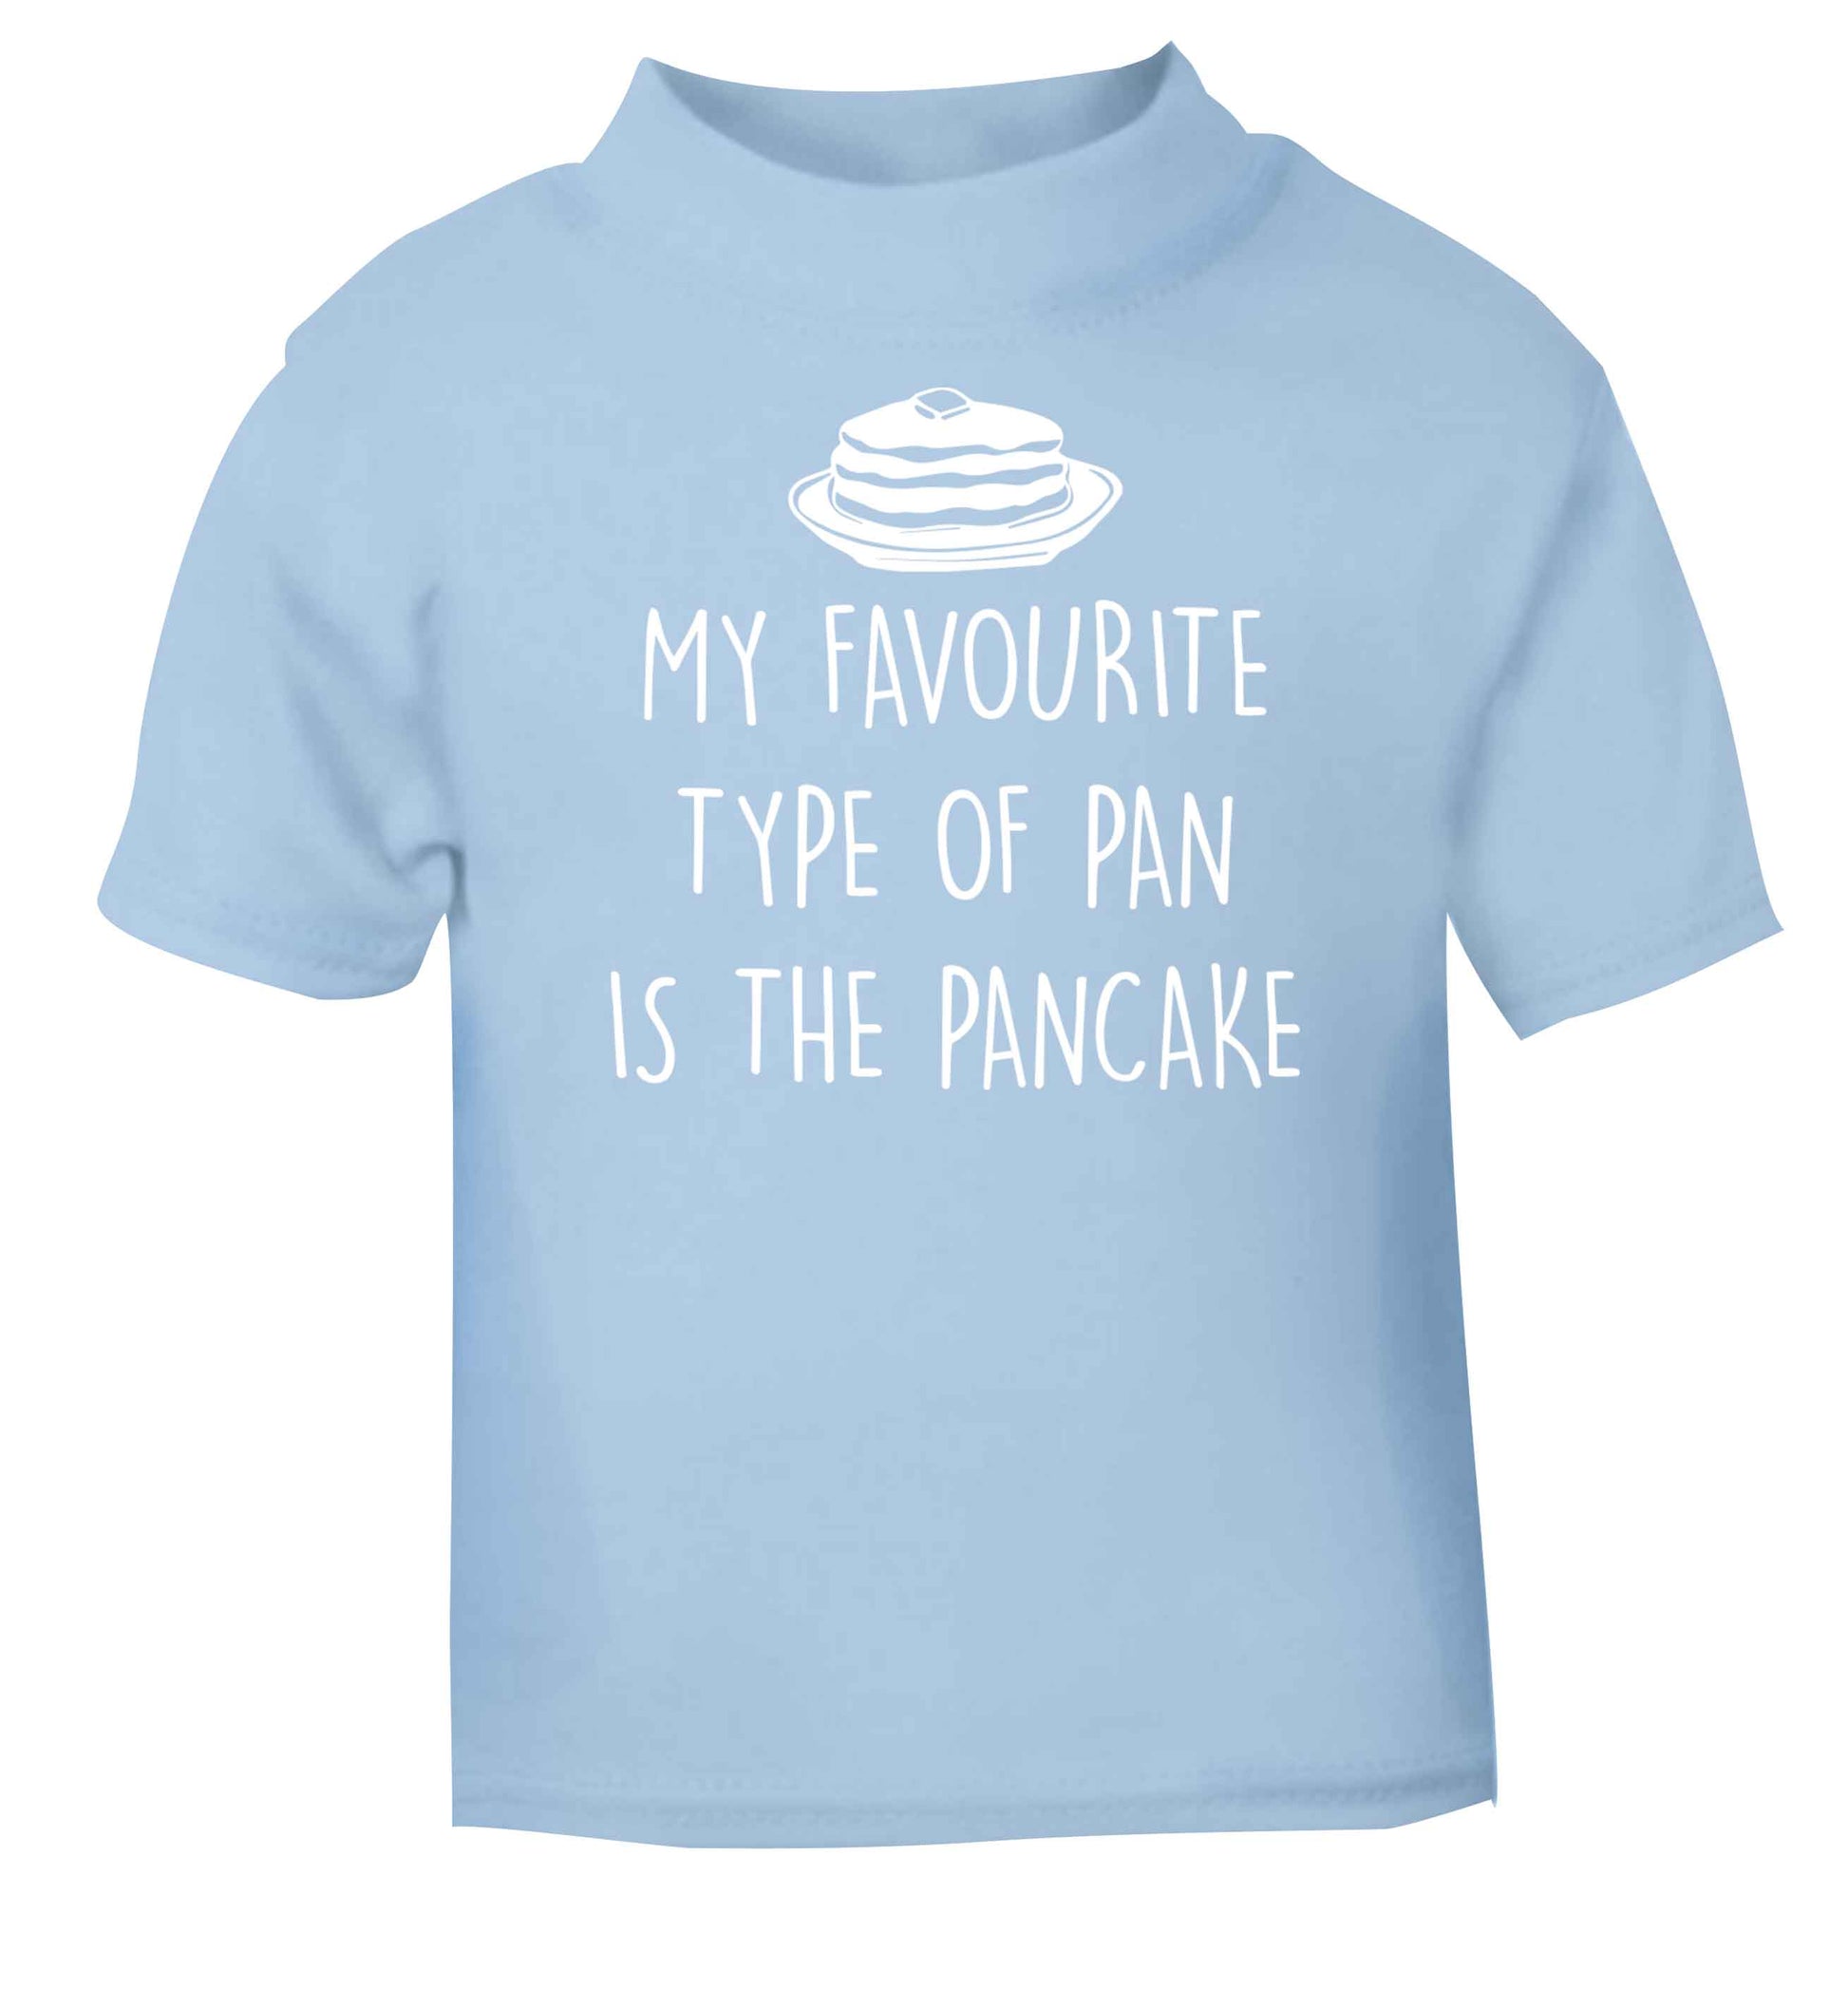 My favourite type of pan is the pancake light blue baby toddler Tshirt 2 Years